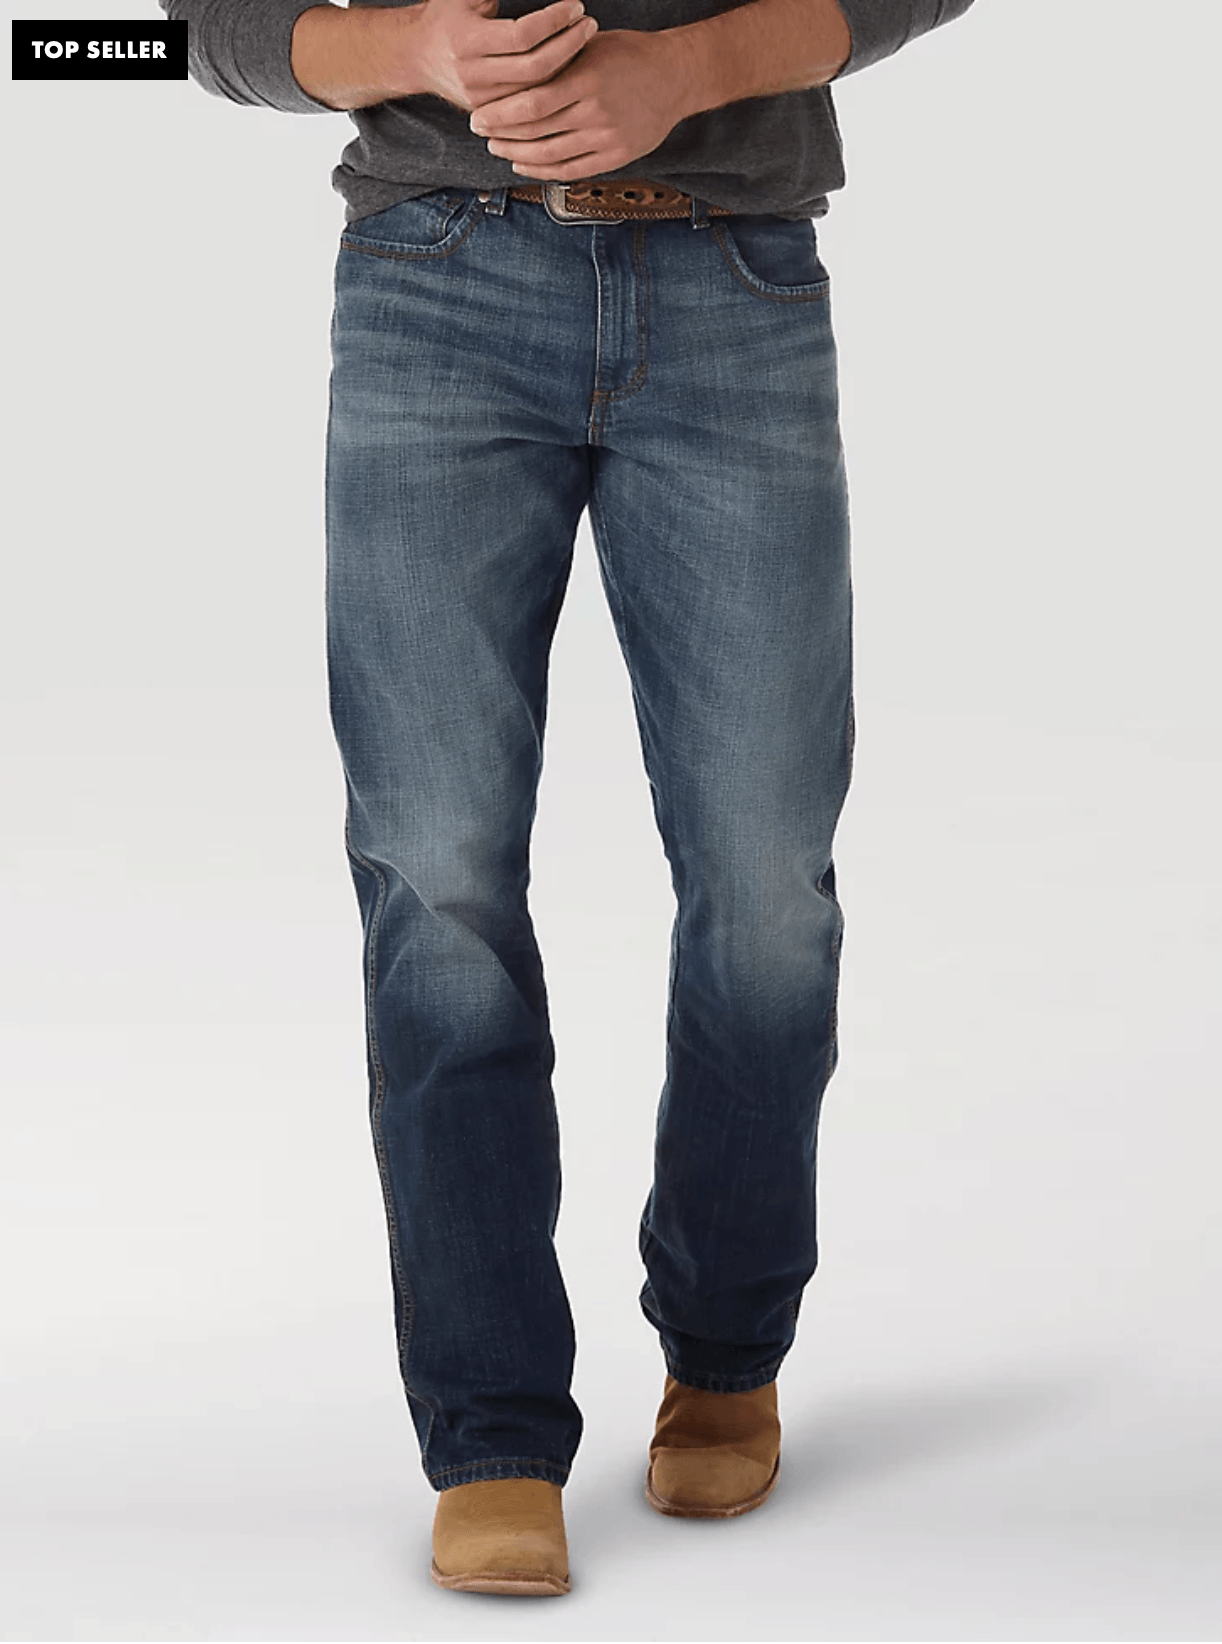 Wrangler Retro Relaxed Fit Bootcut Jean-